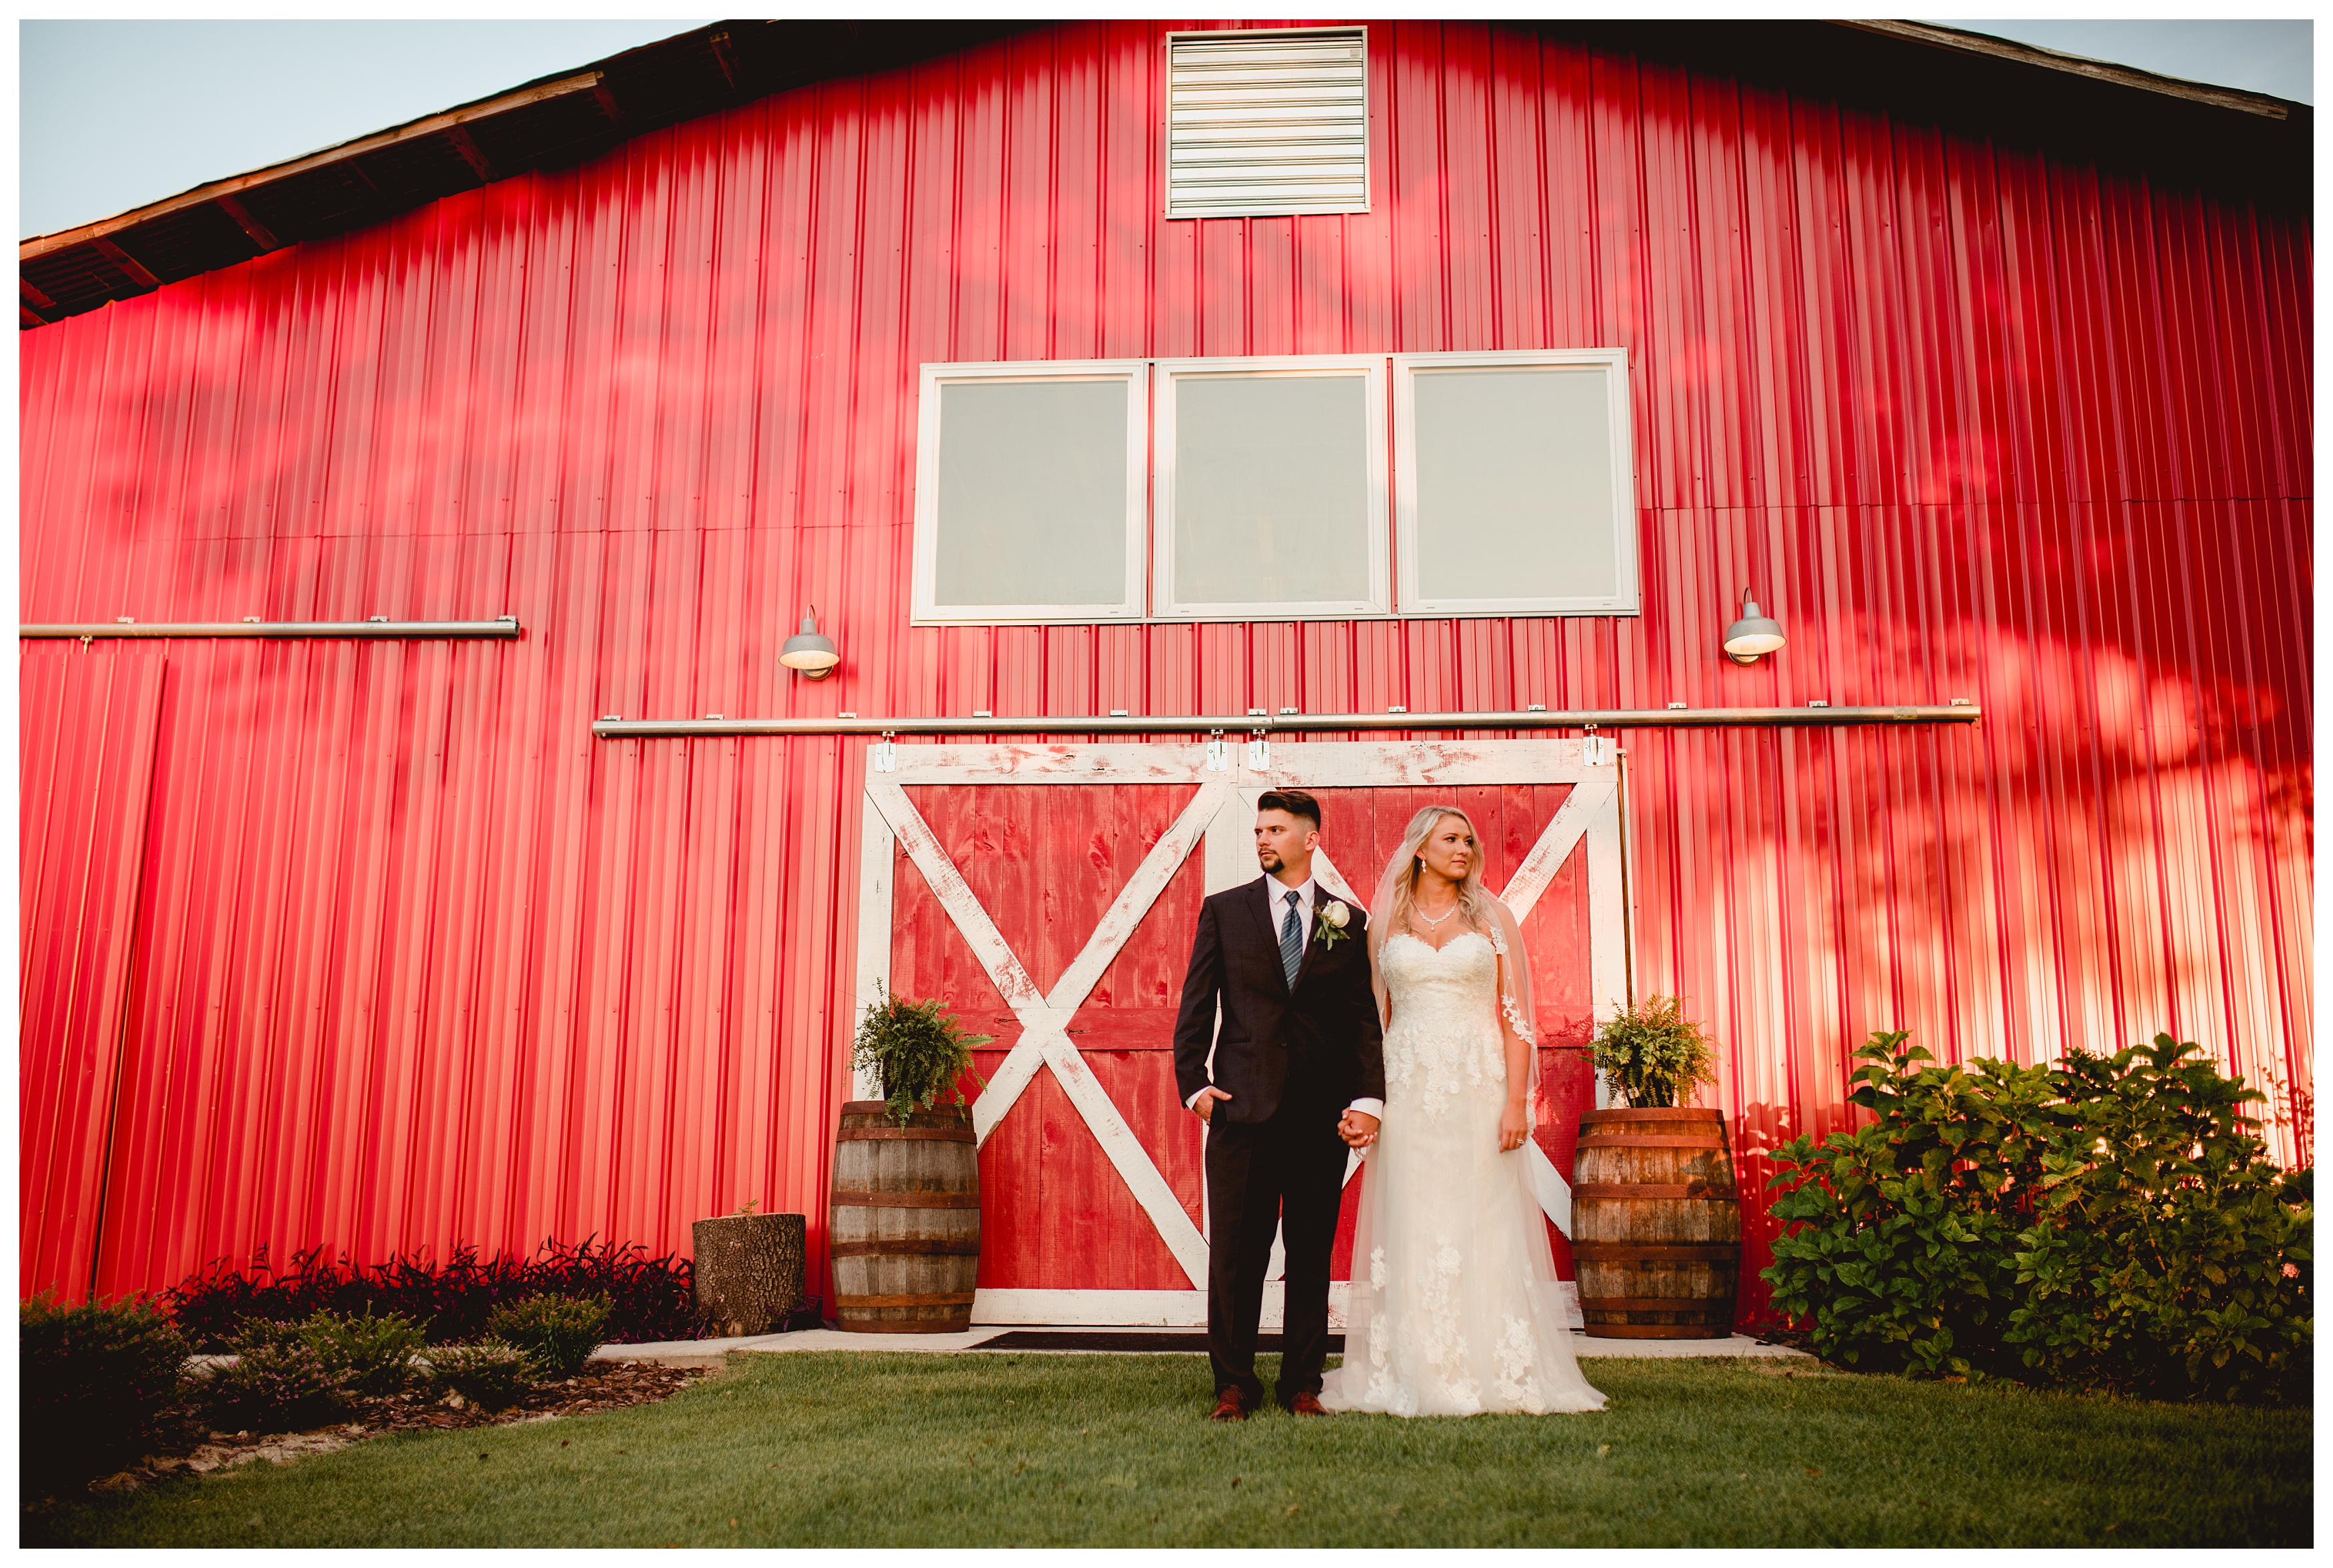 Bride and groom with red barn at Seven Hills Farm in Trenton. Pro wedding photographer in Tallahassee FL. Shelly Williams Photography